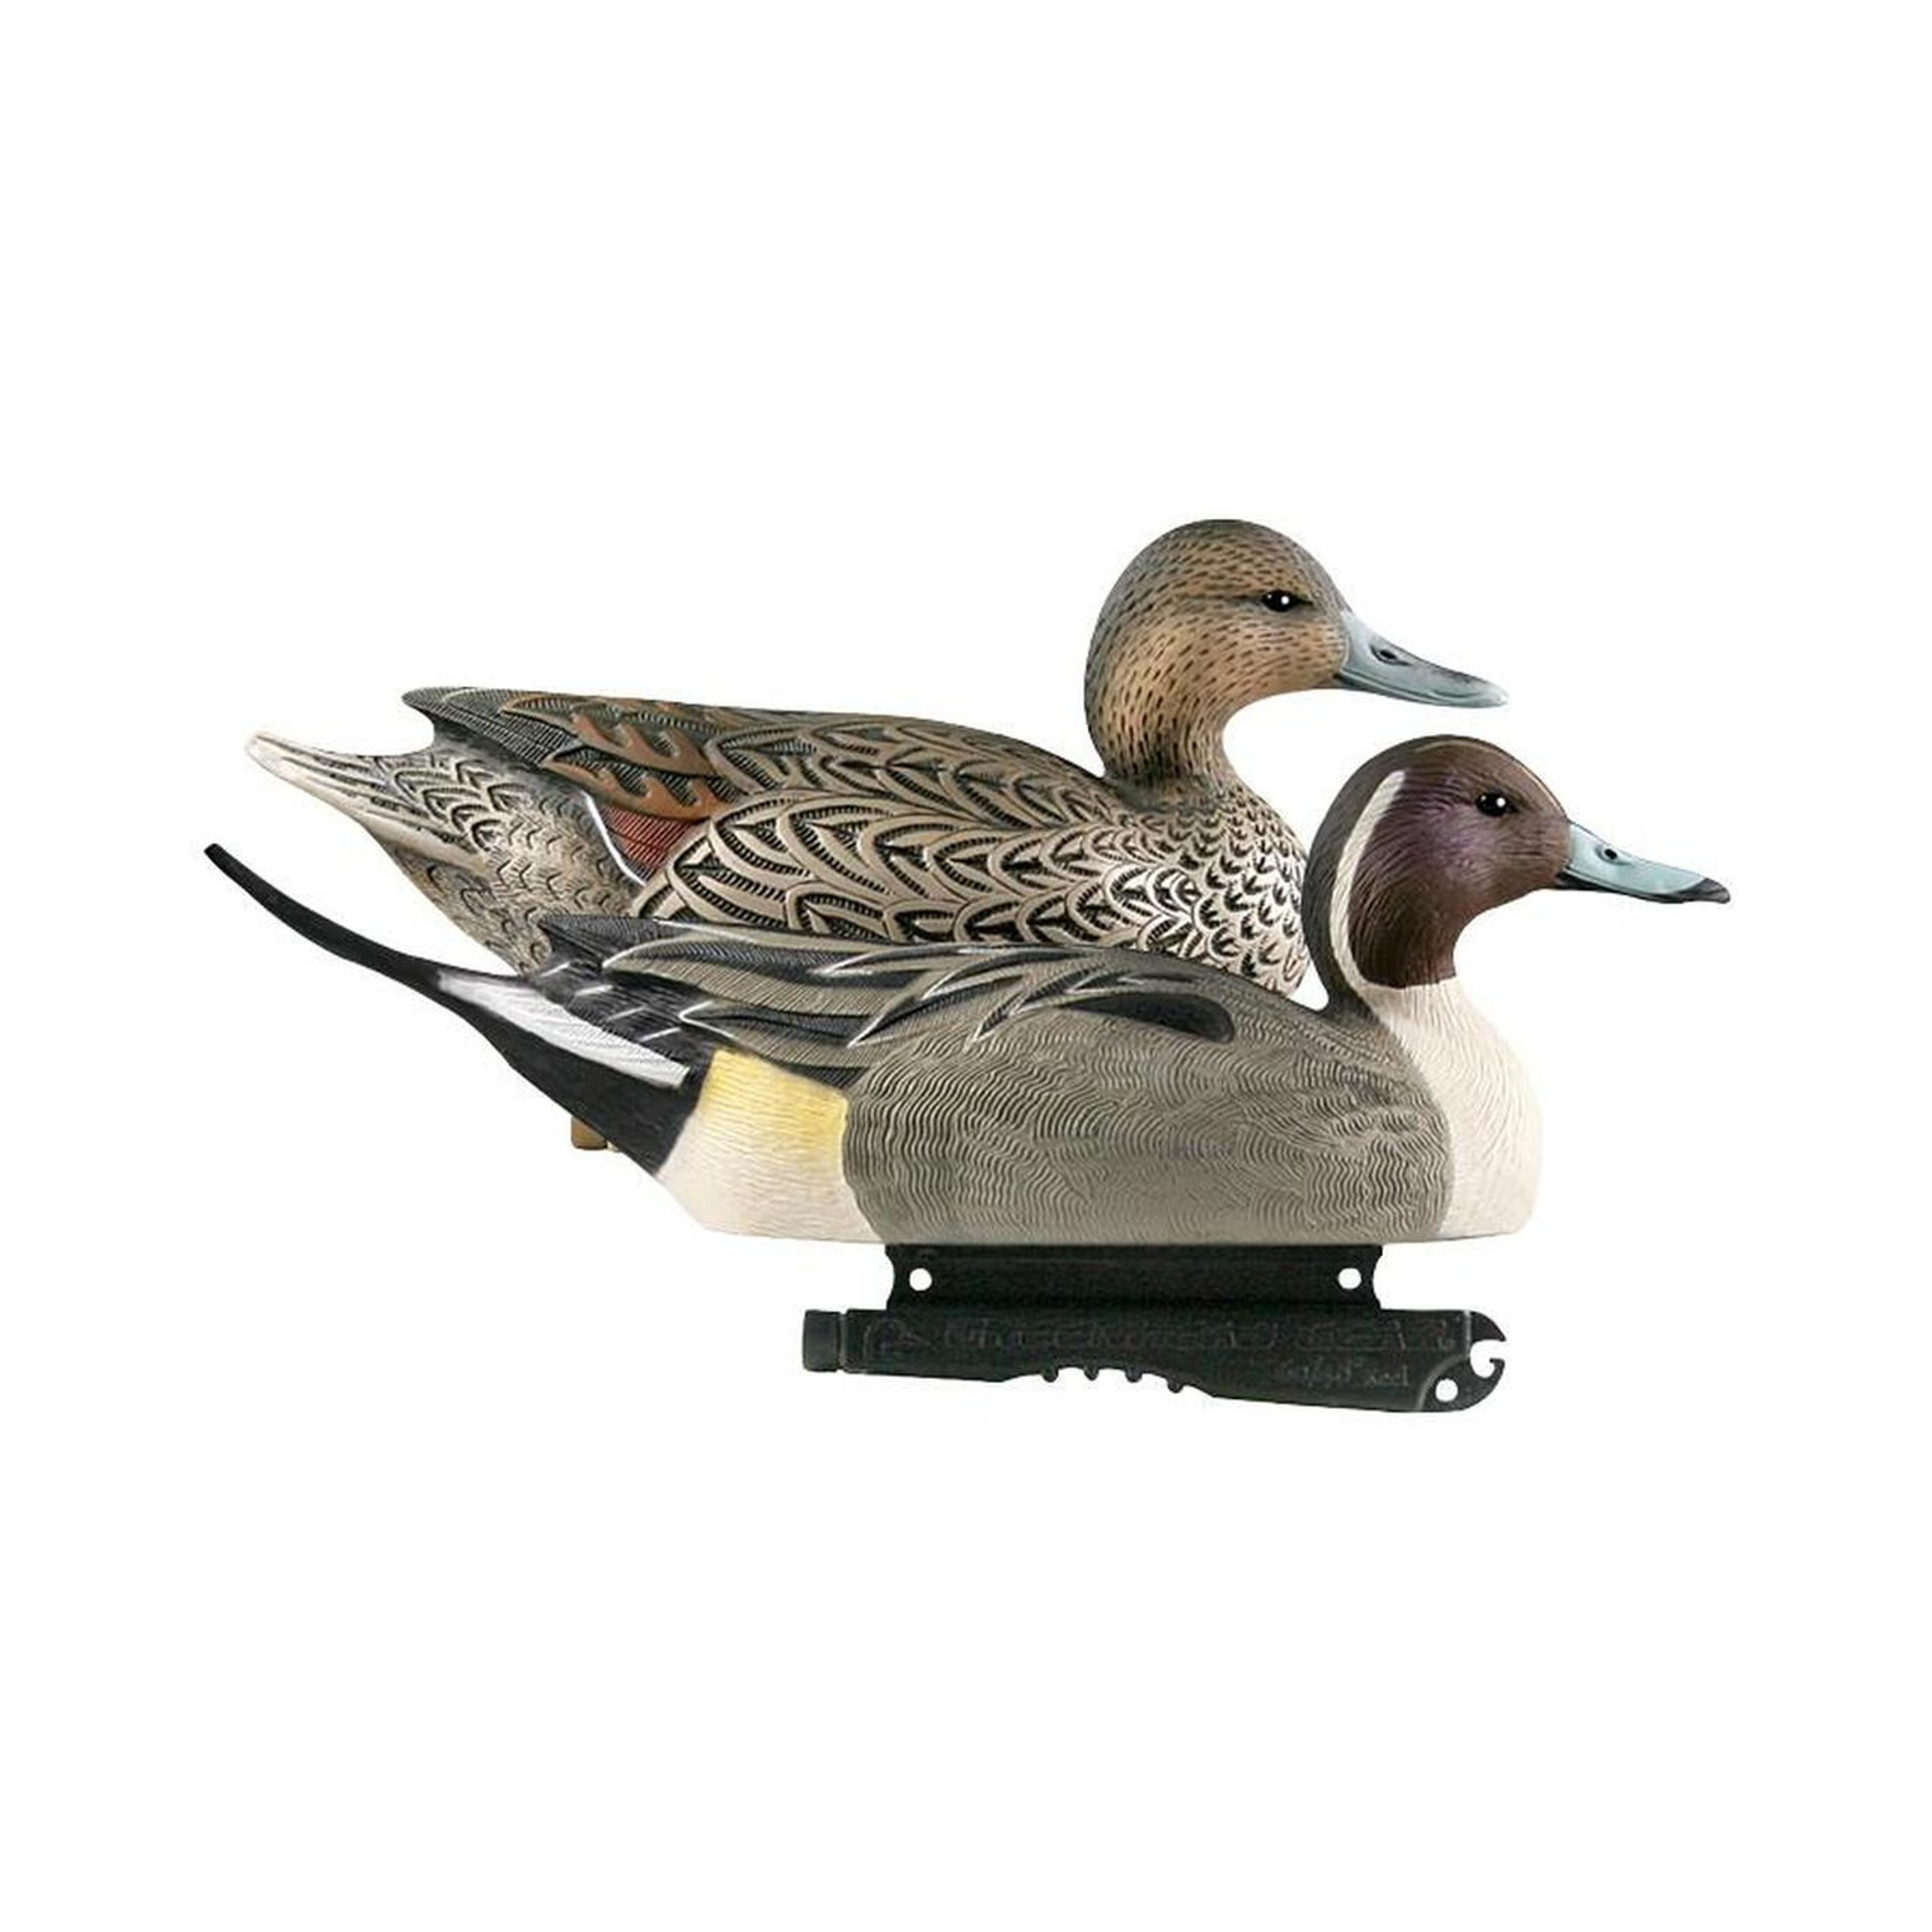  Ghg Life Size Pintails